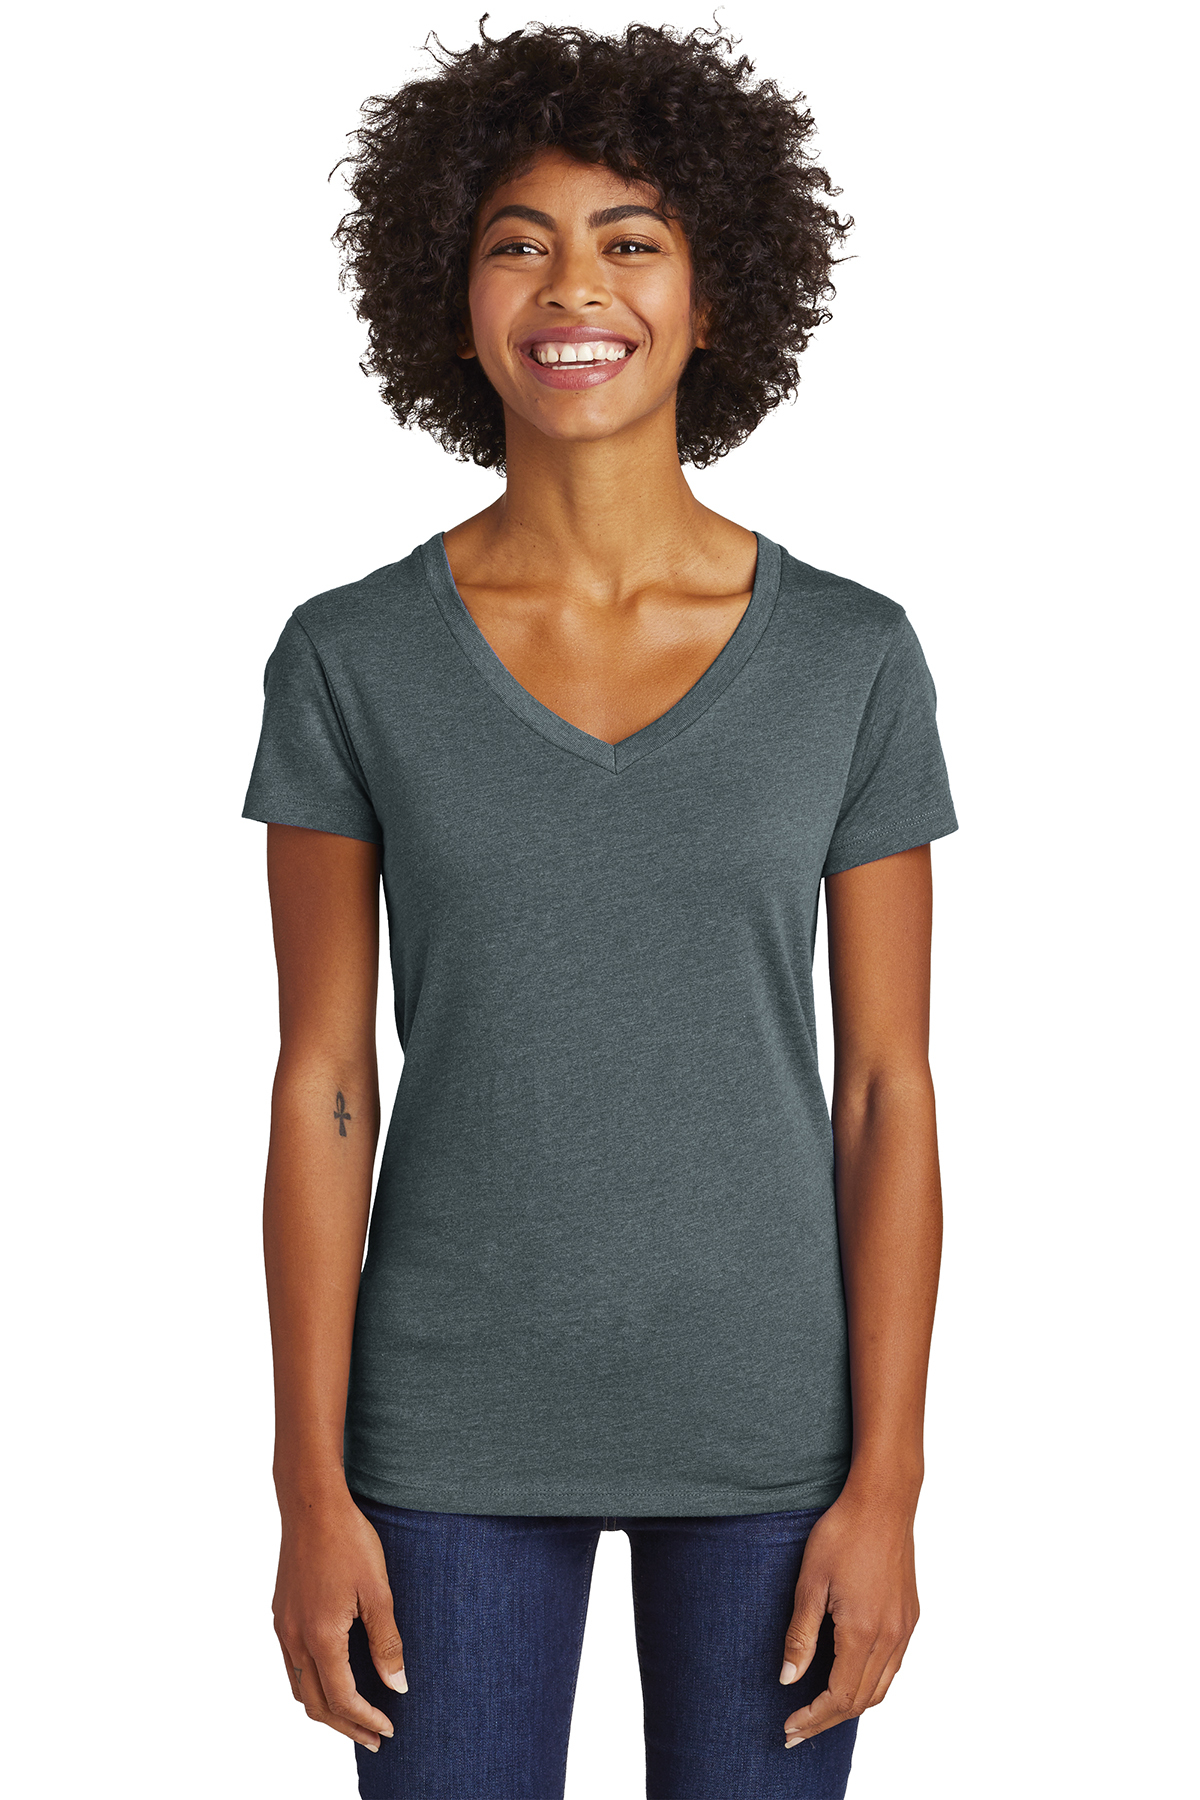 click to view Heather Deep Charcoal